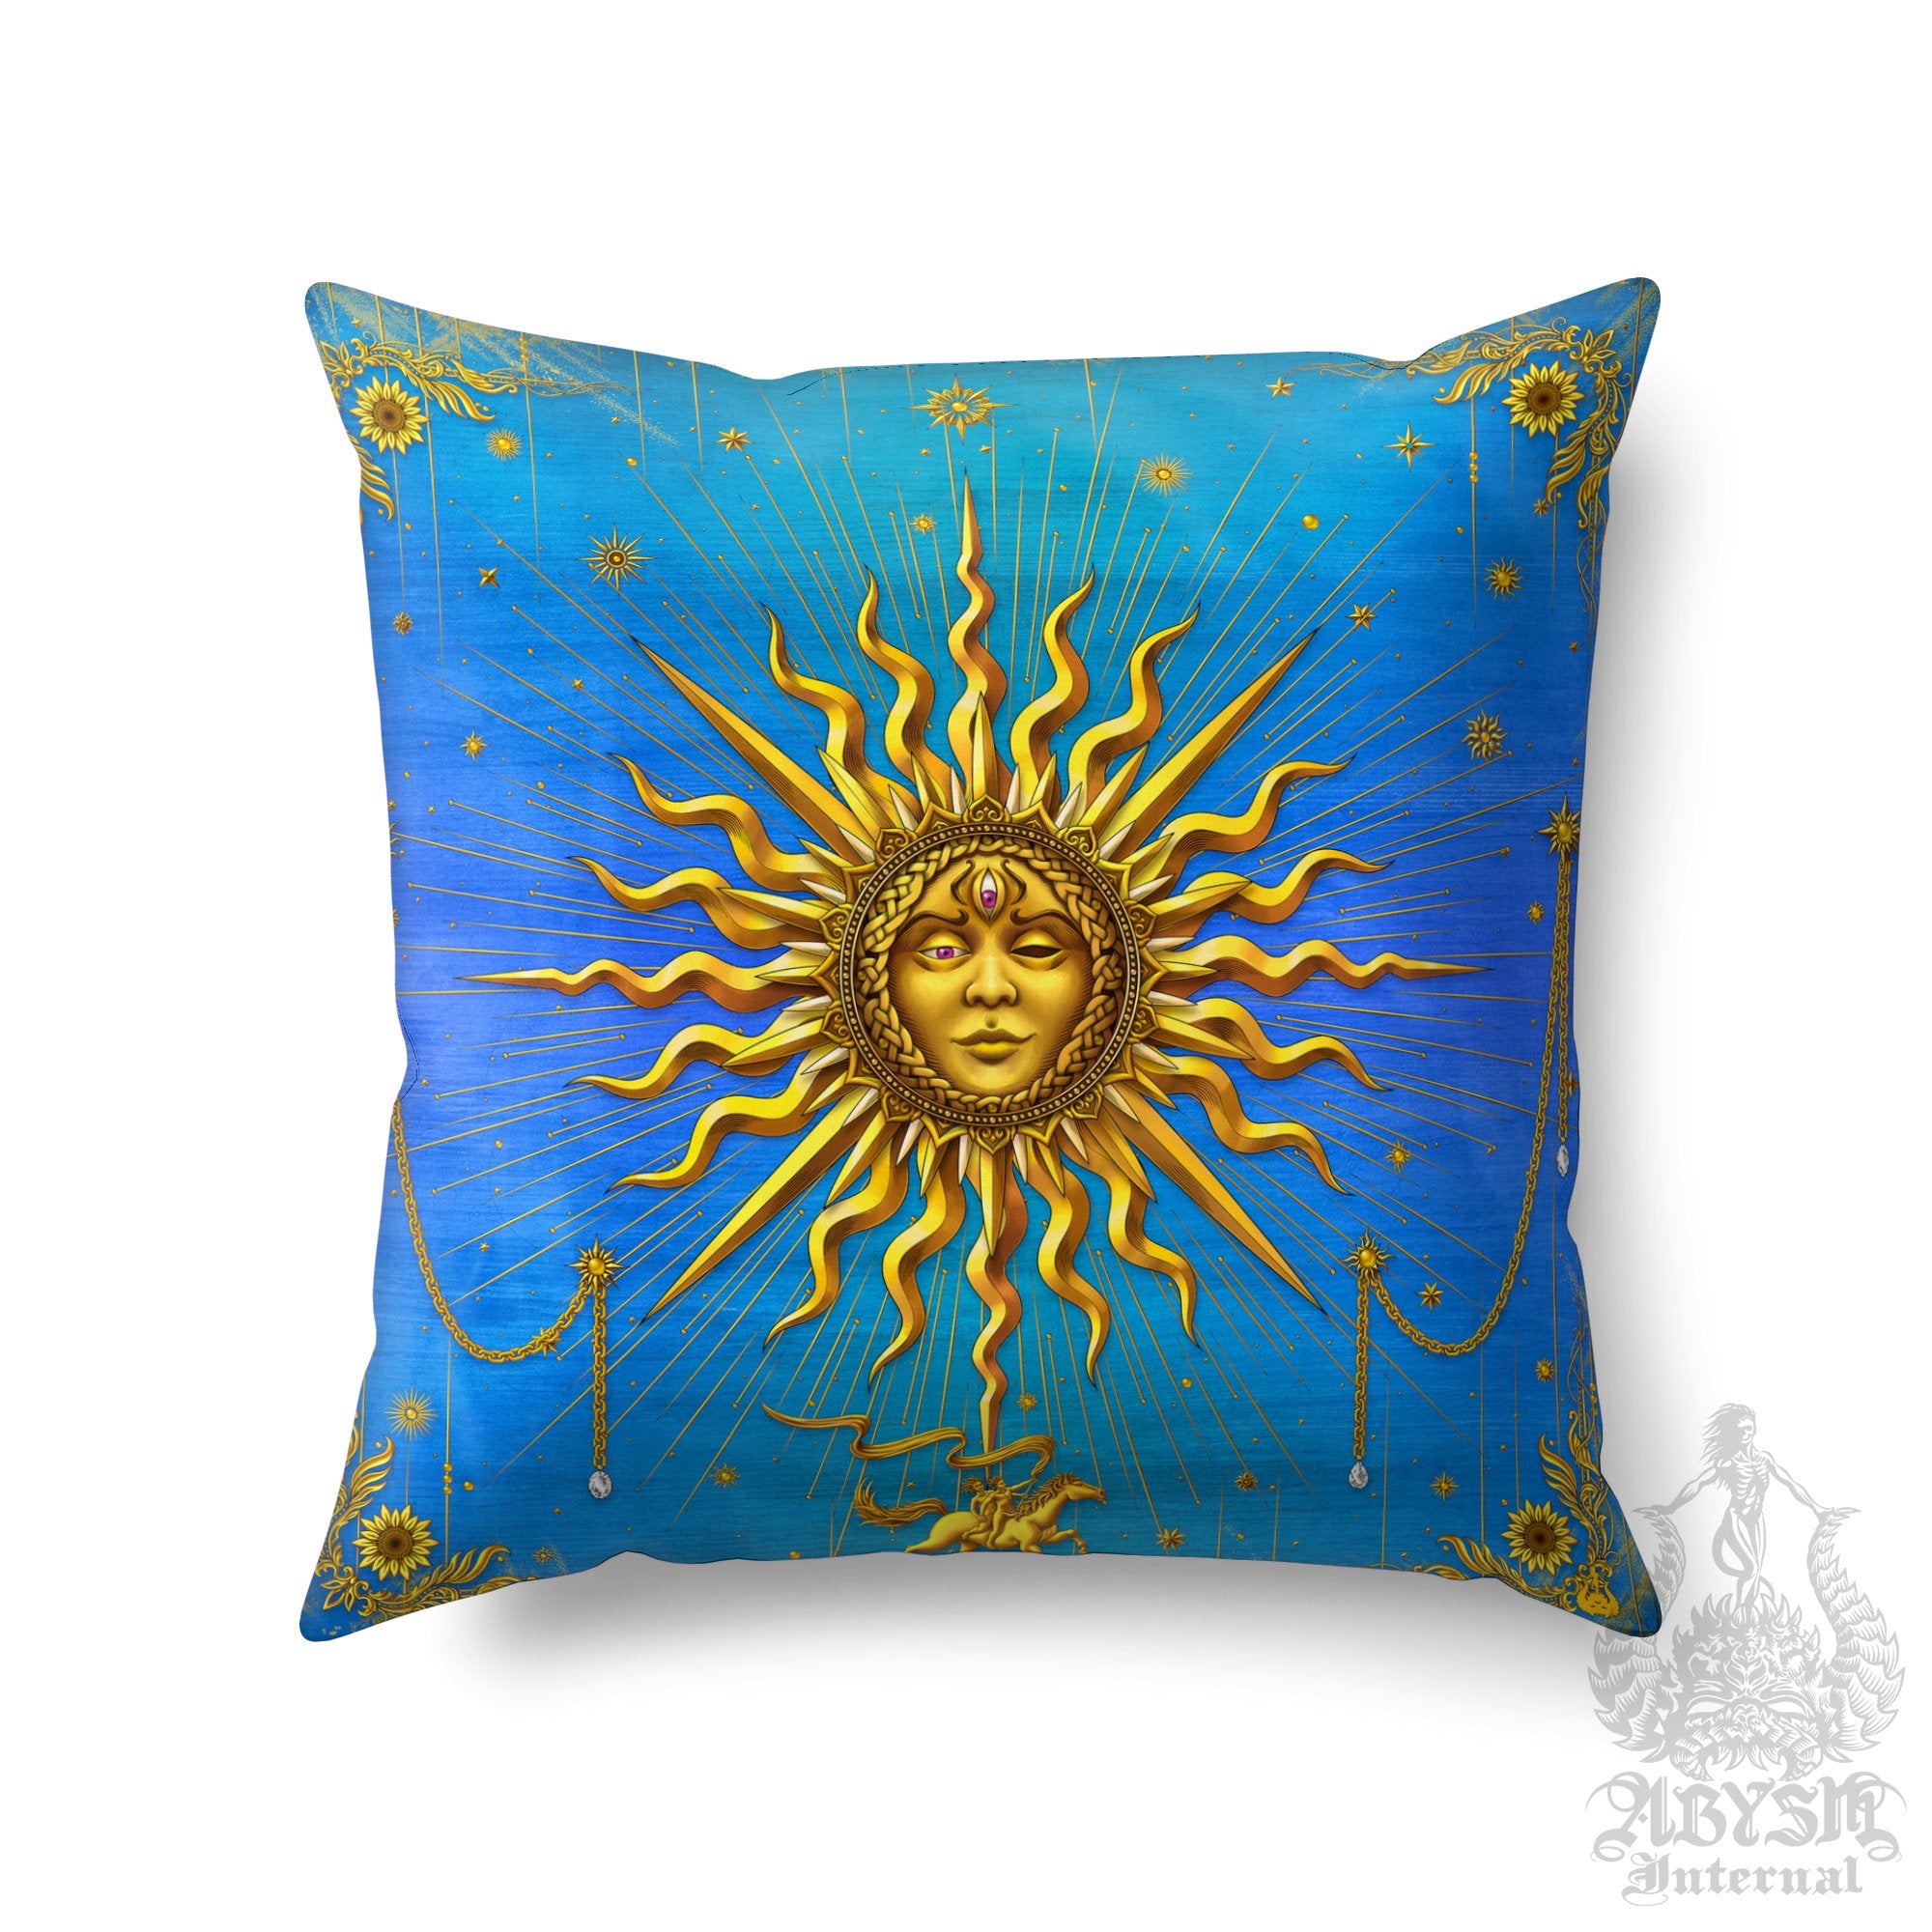 Gold Sun Throw Pillow, Boho Decorative Accent Pillow, Square Cushion Cover, Arcana Tarot Art, Indie Home, Magic & Fortune Room Decor - 7 Colors - Abysm Internal